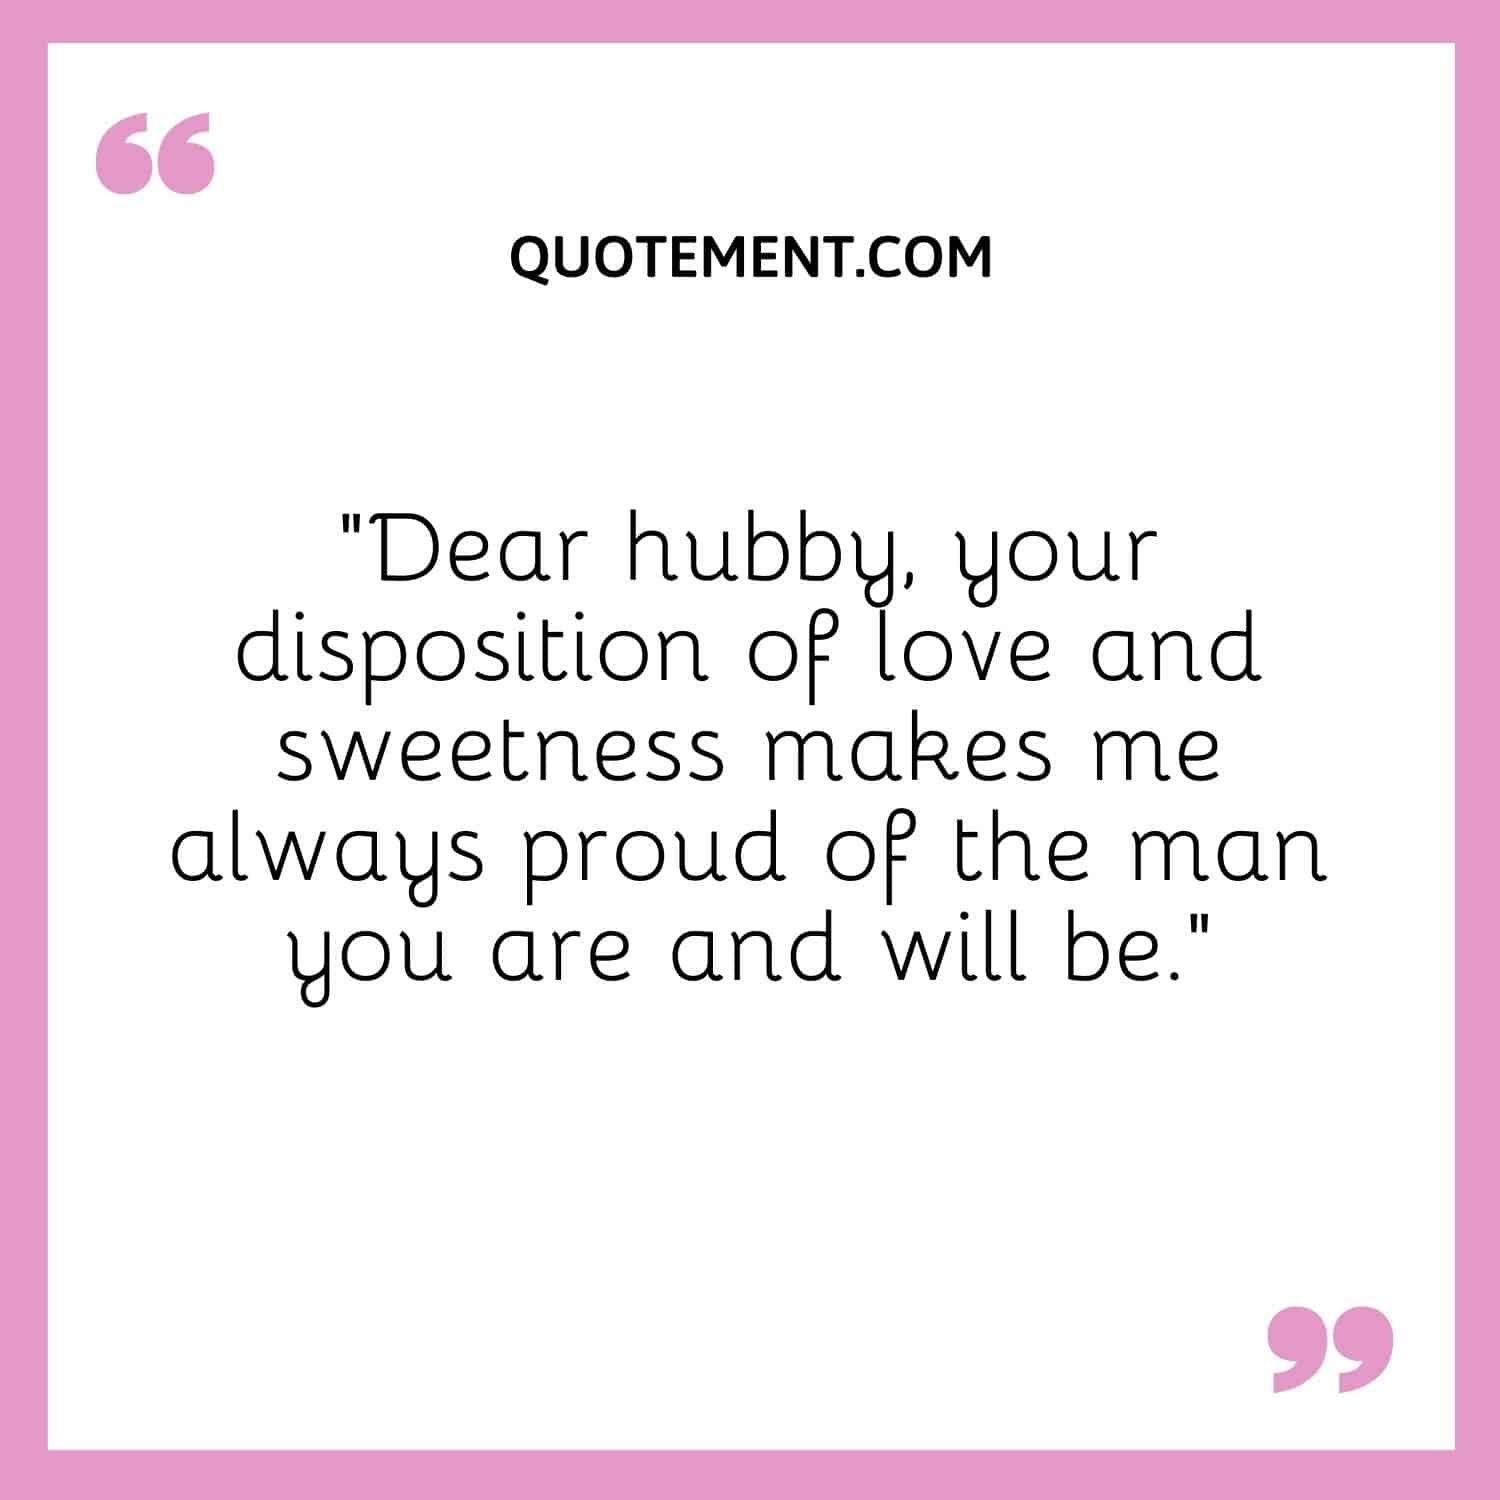 “Dear hubby, your disposition of love and sweetness makes me always proud of the man you are and will be.”